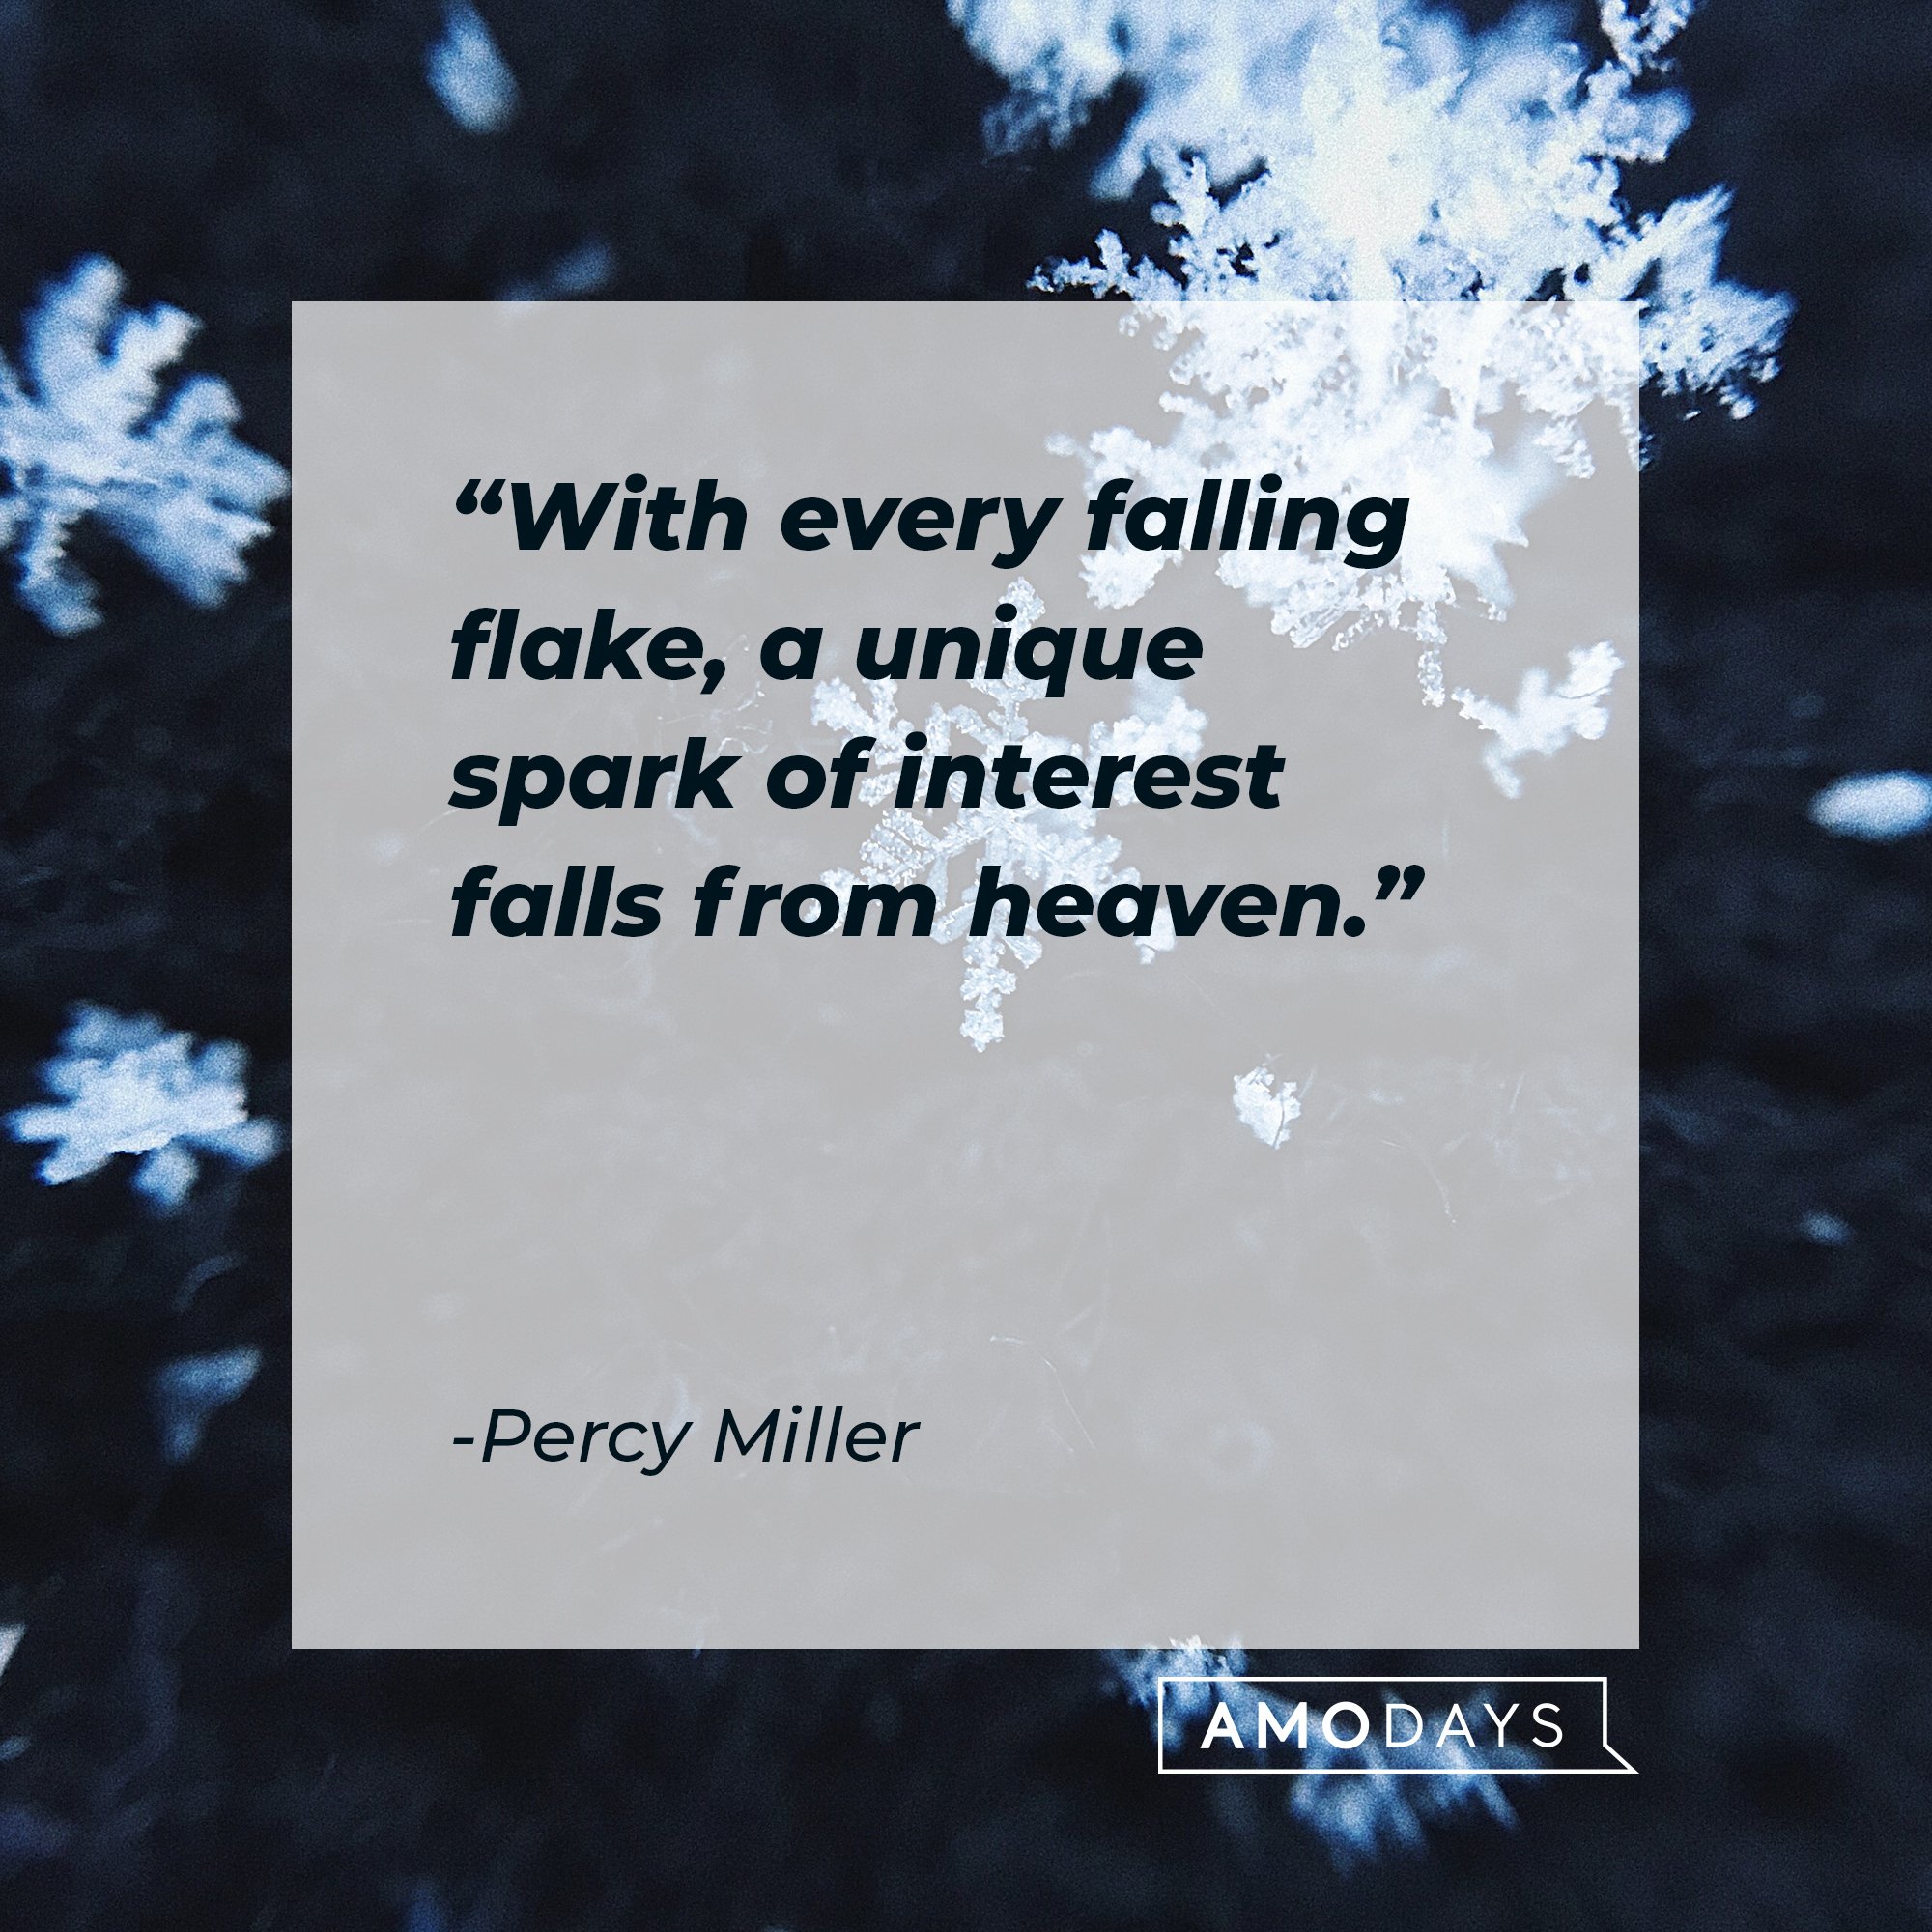   Percy Miller’s quote: "With every falling flake, a unique spark of interest falls from heaven." | Image: AmoDays